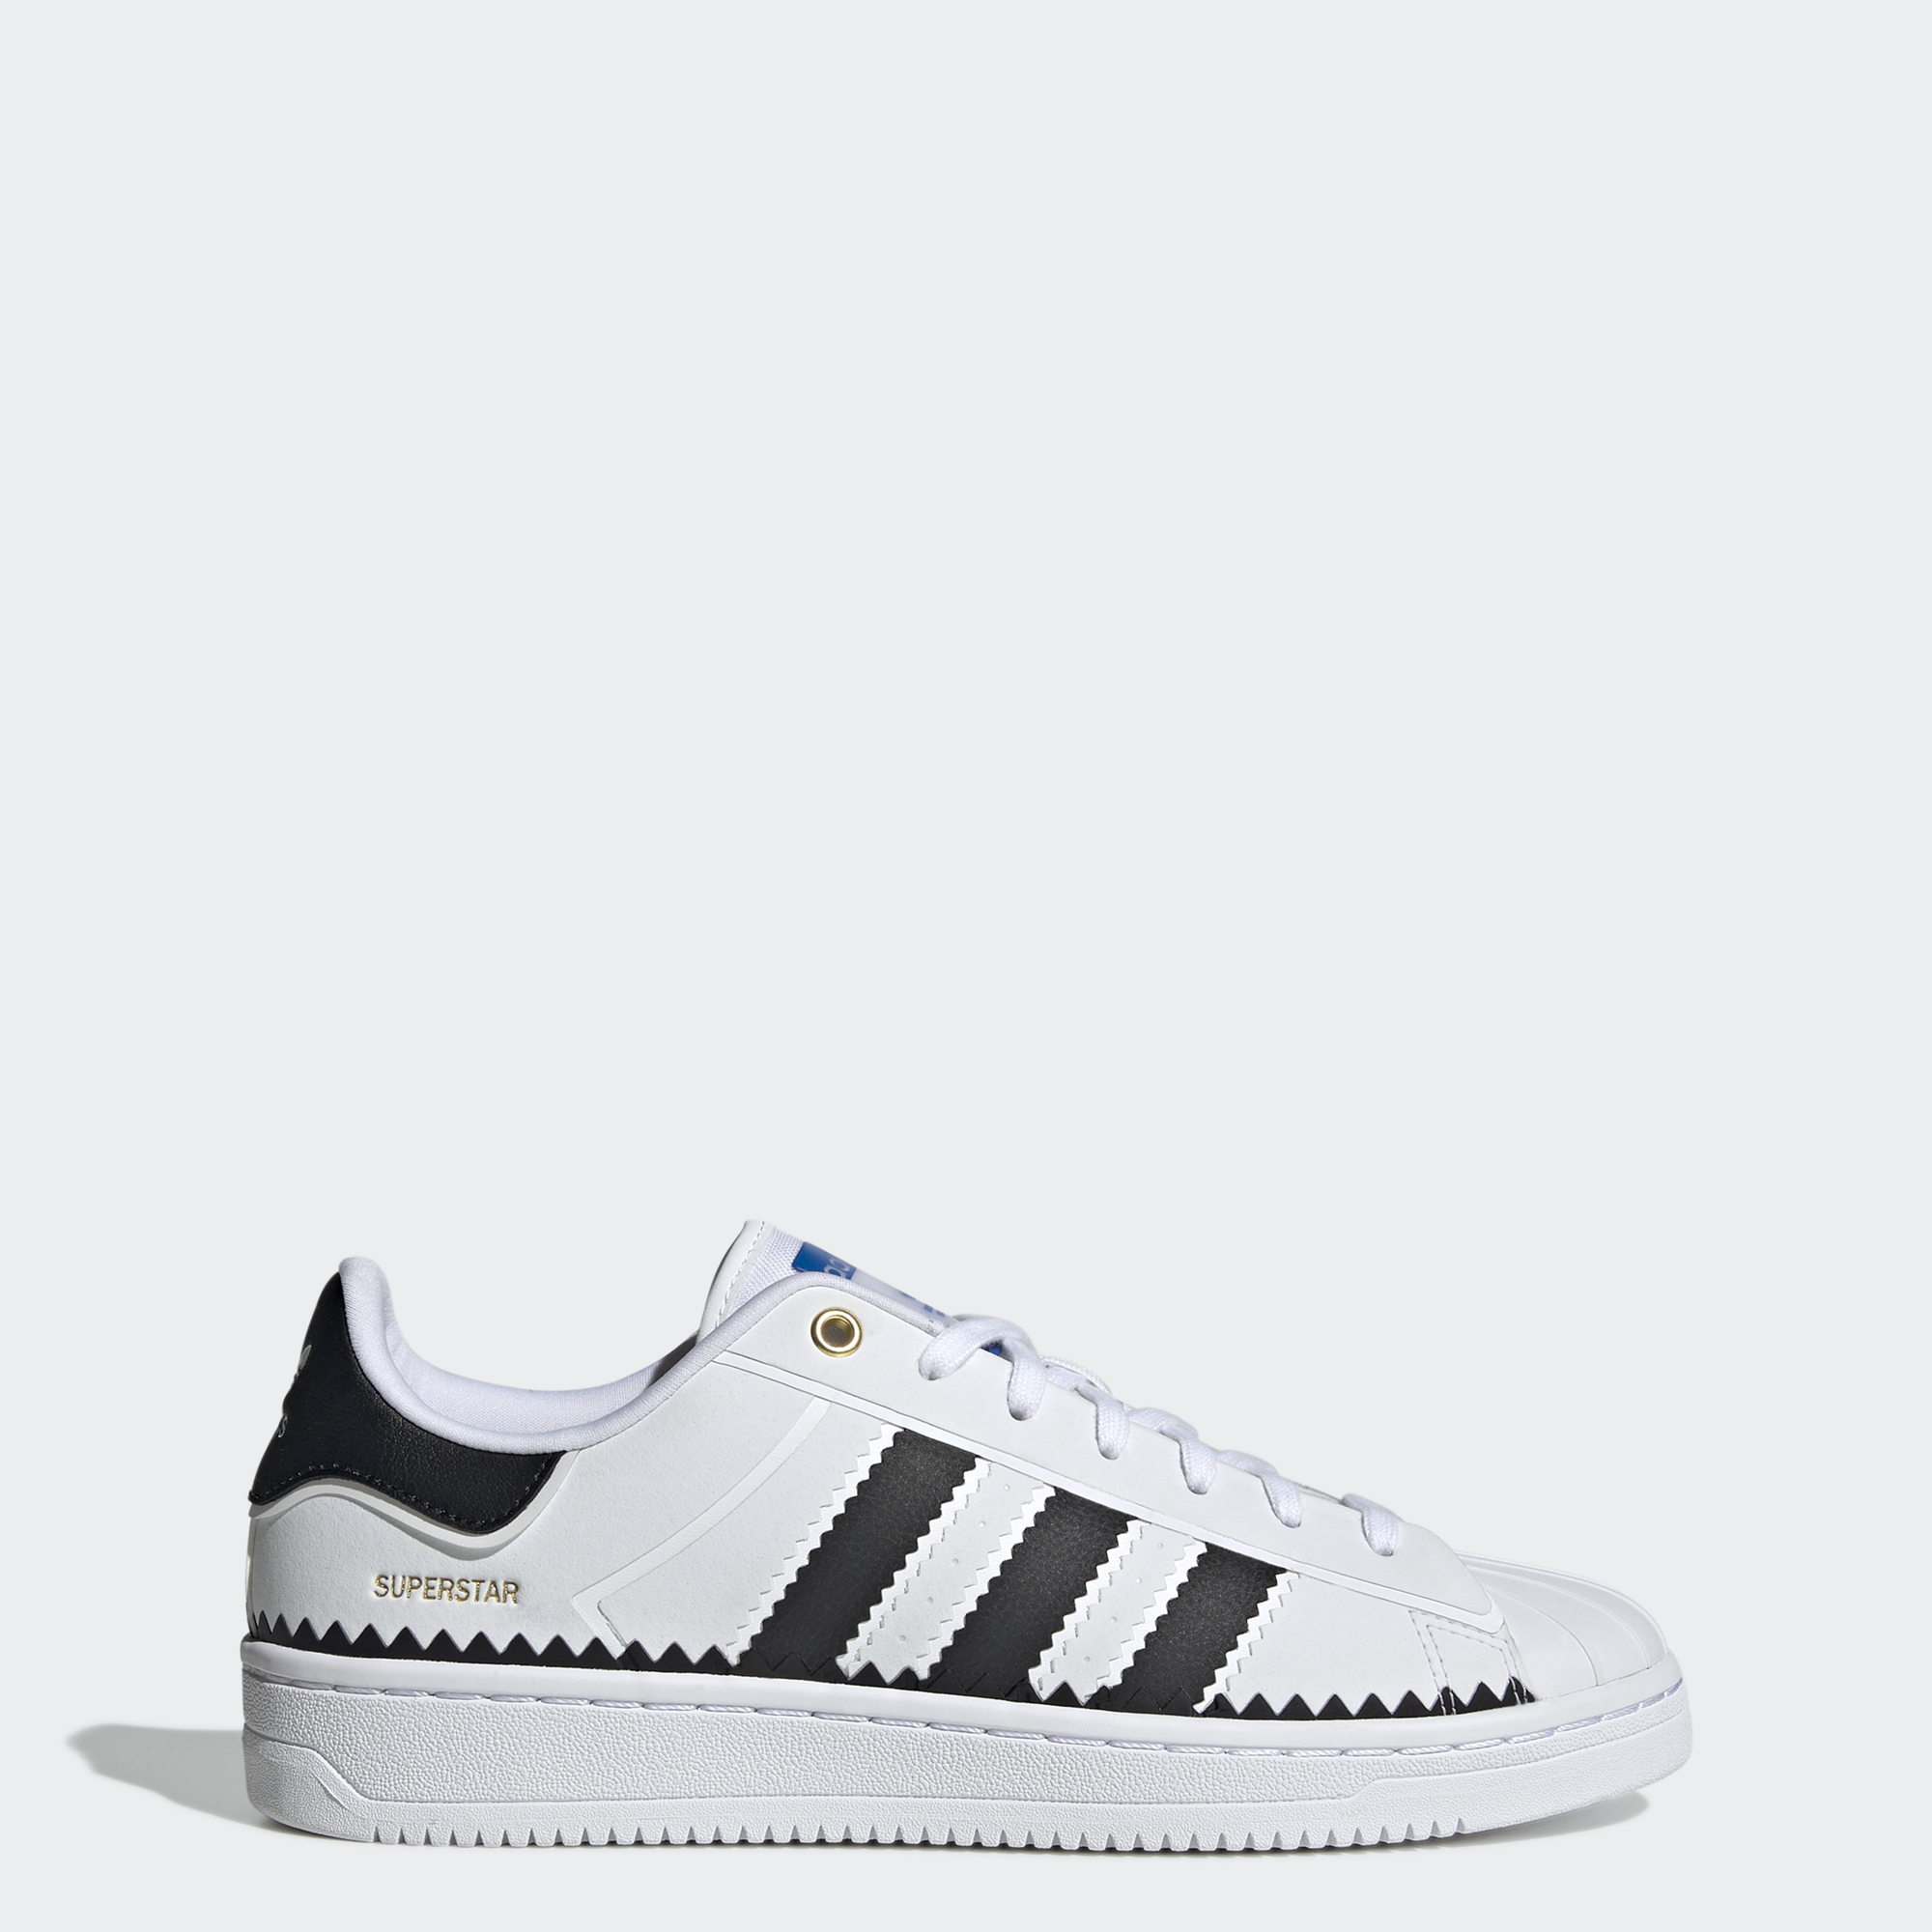 adidas originals superstar 80's all over white sneakers